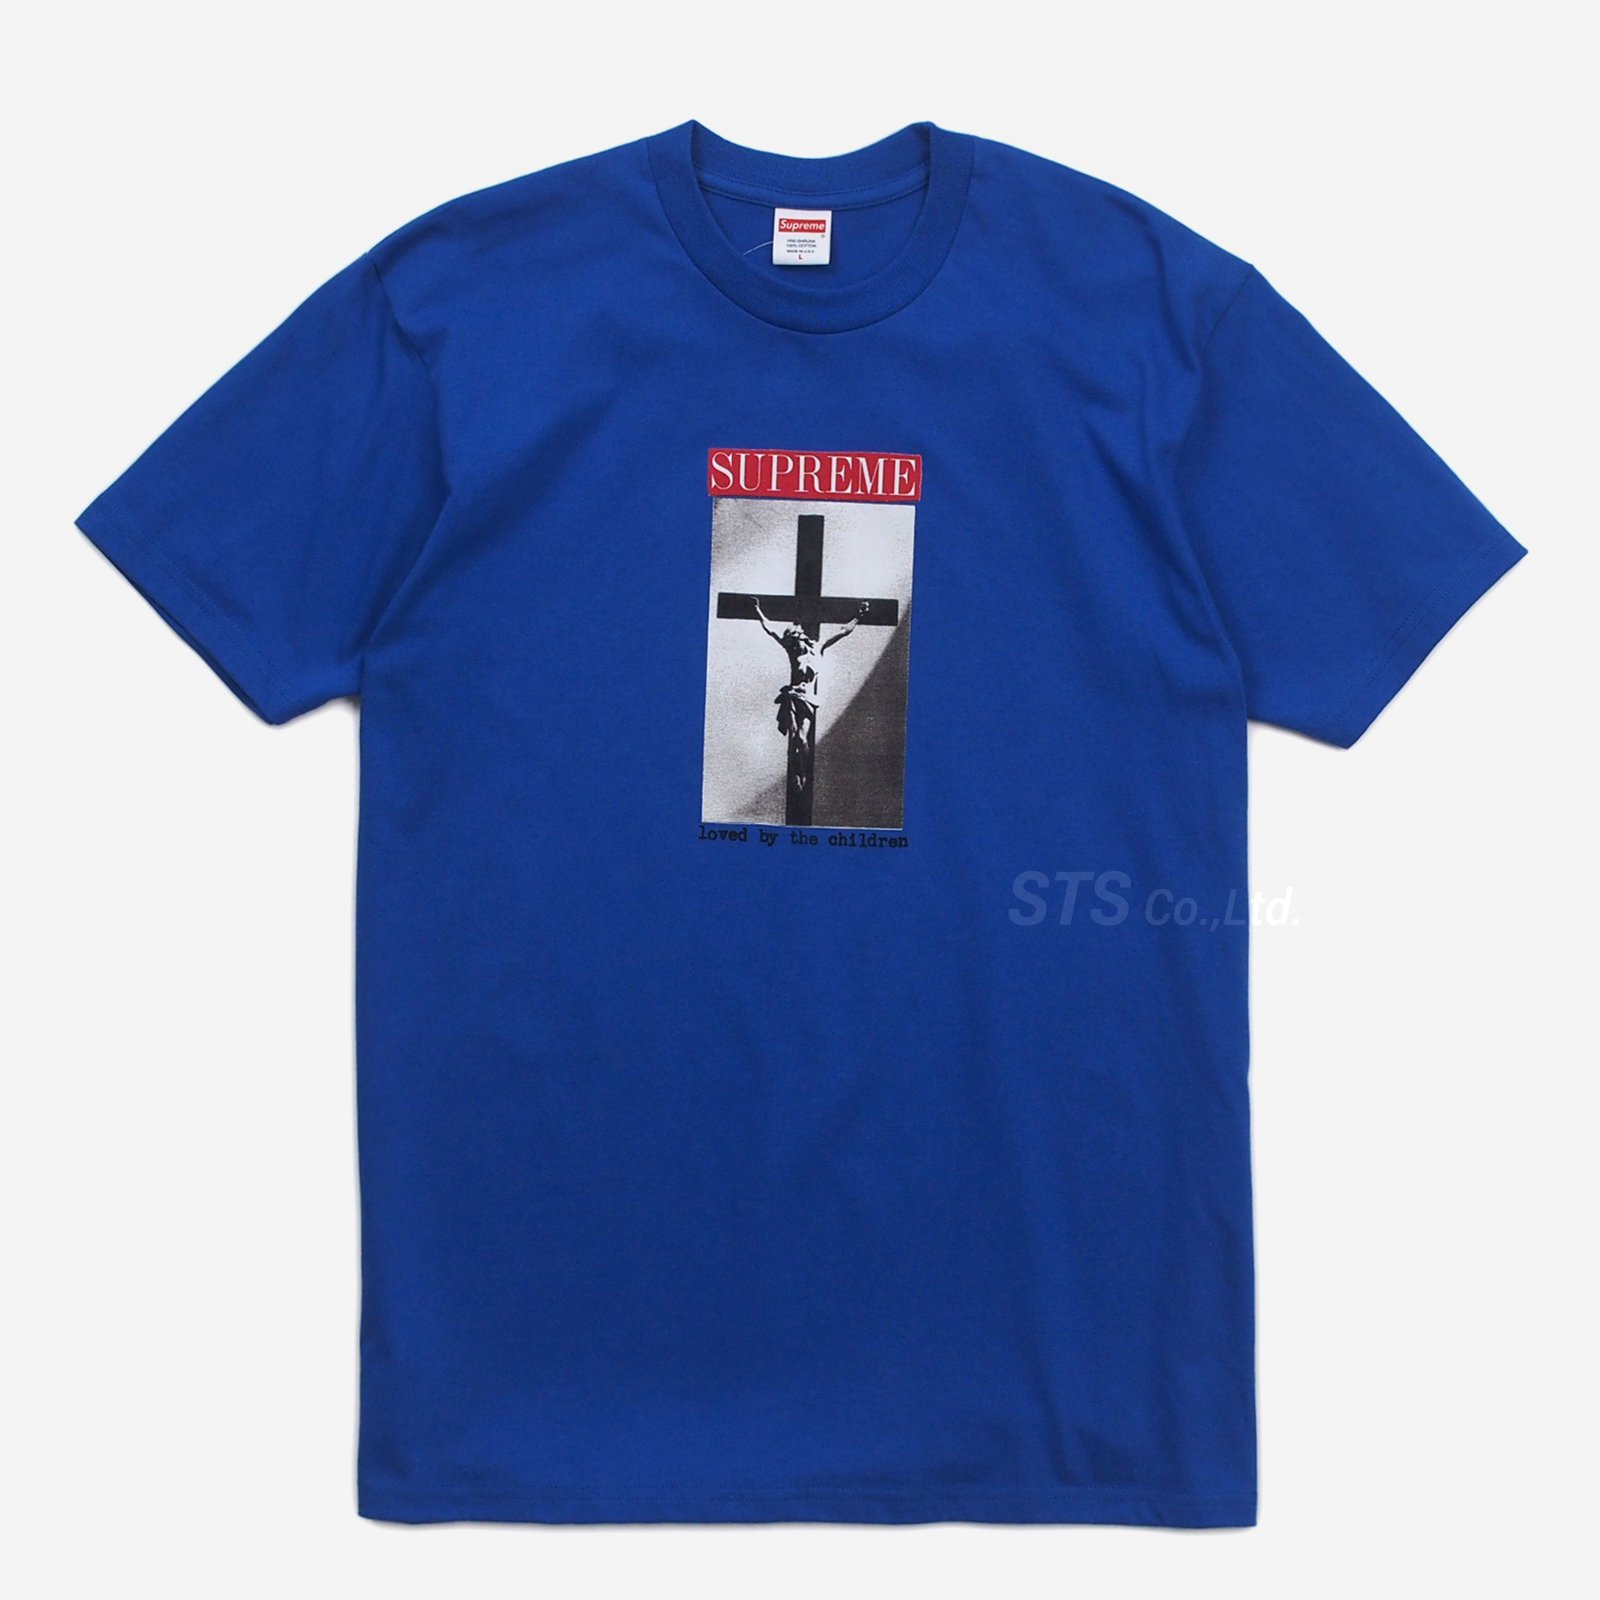 Supreme Loved By The Children Tee シュプリーム